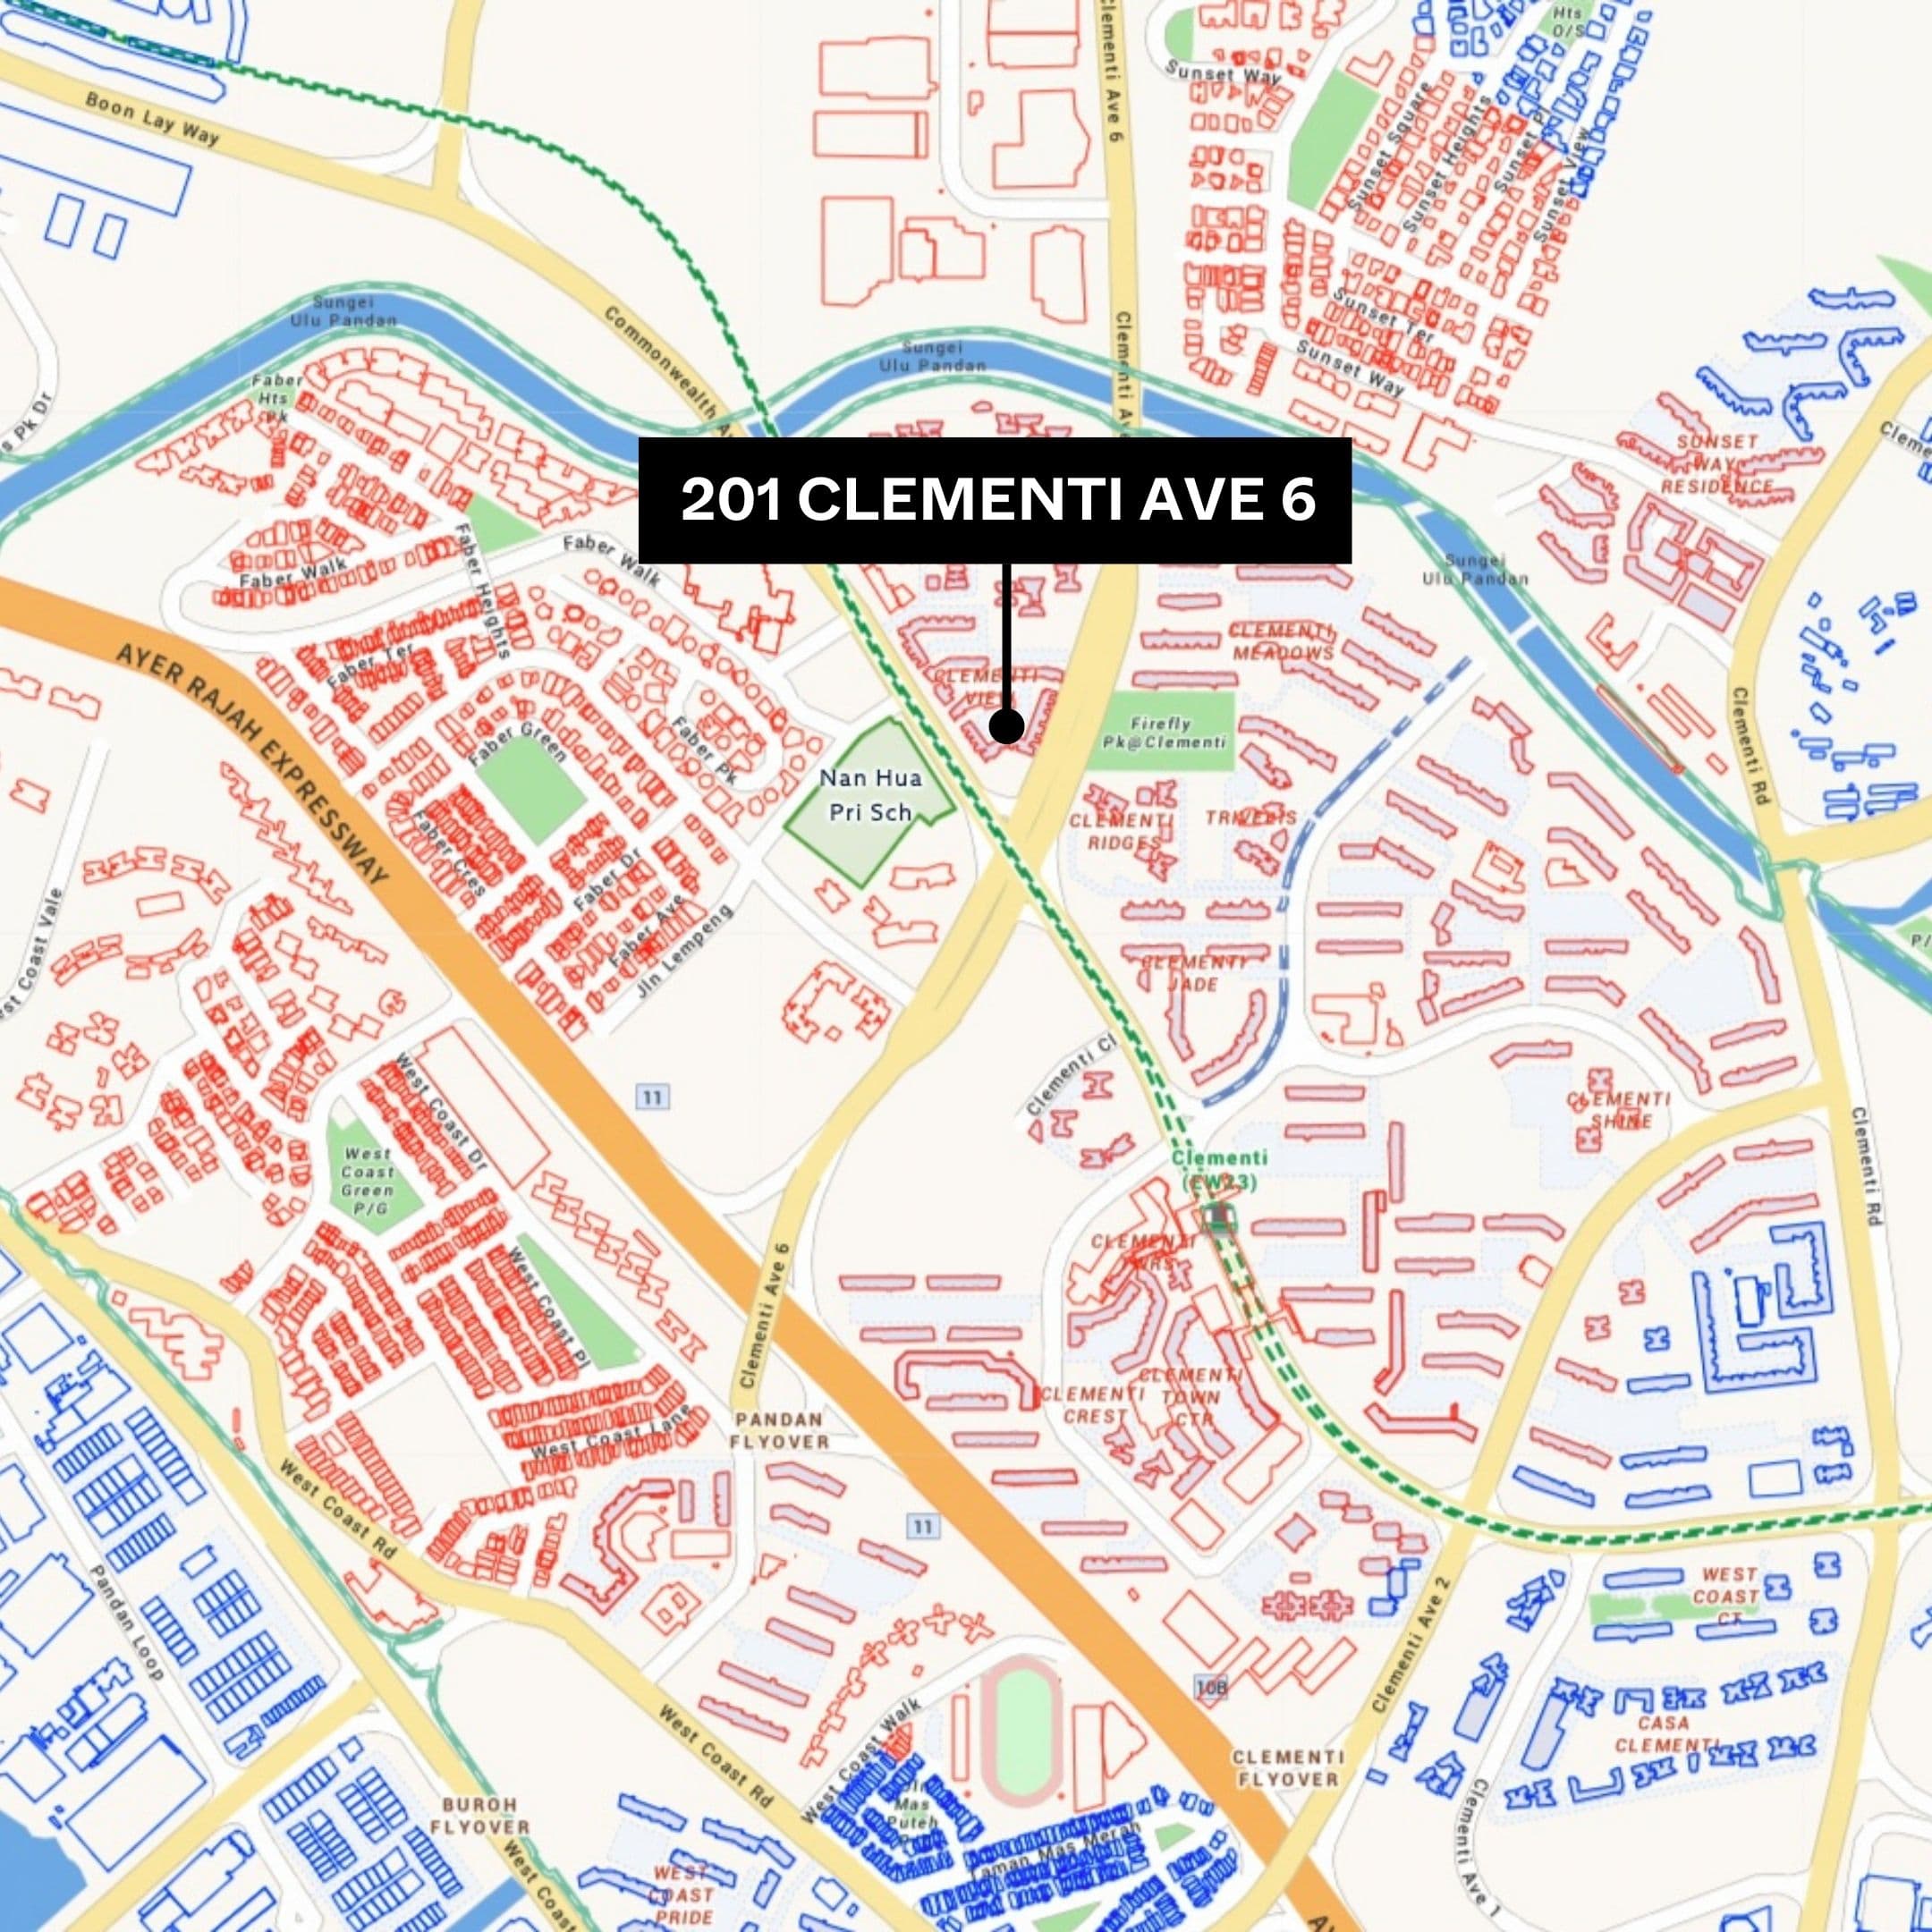 201 CLEMENTI AVE 6